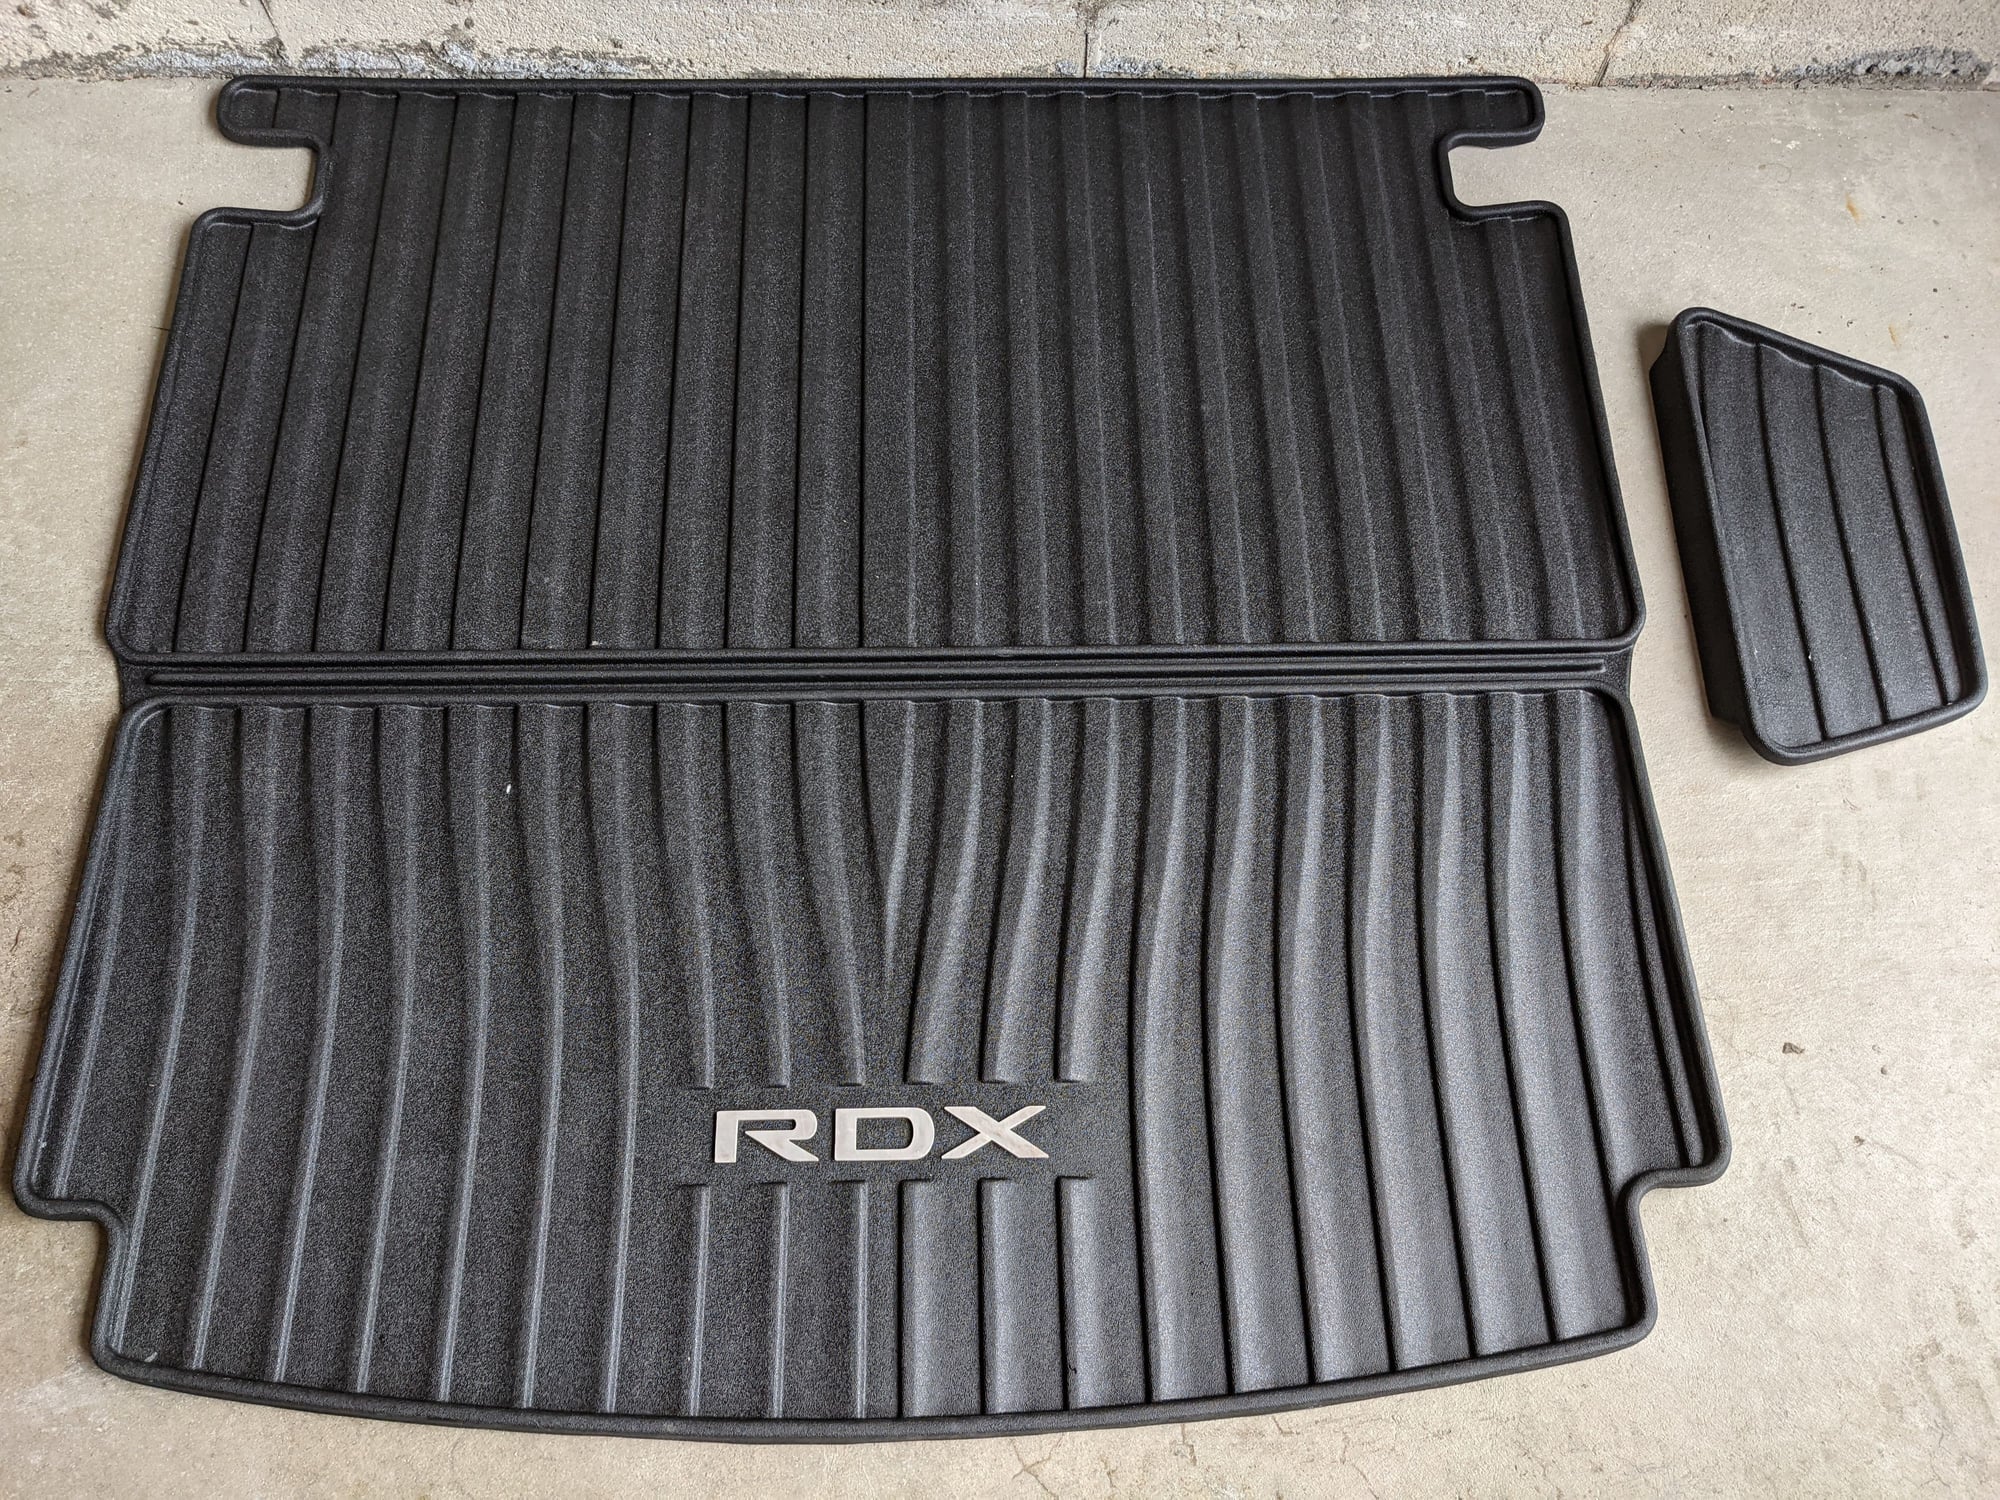 Interior/Upholstery - FS: 2019 - 2021 Acura RDX All-season floor and cargo mats (OEM) - Used - 2019 to 2021 Acura RDX - Kitchener, ON N2R0A7, Canada